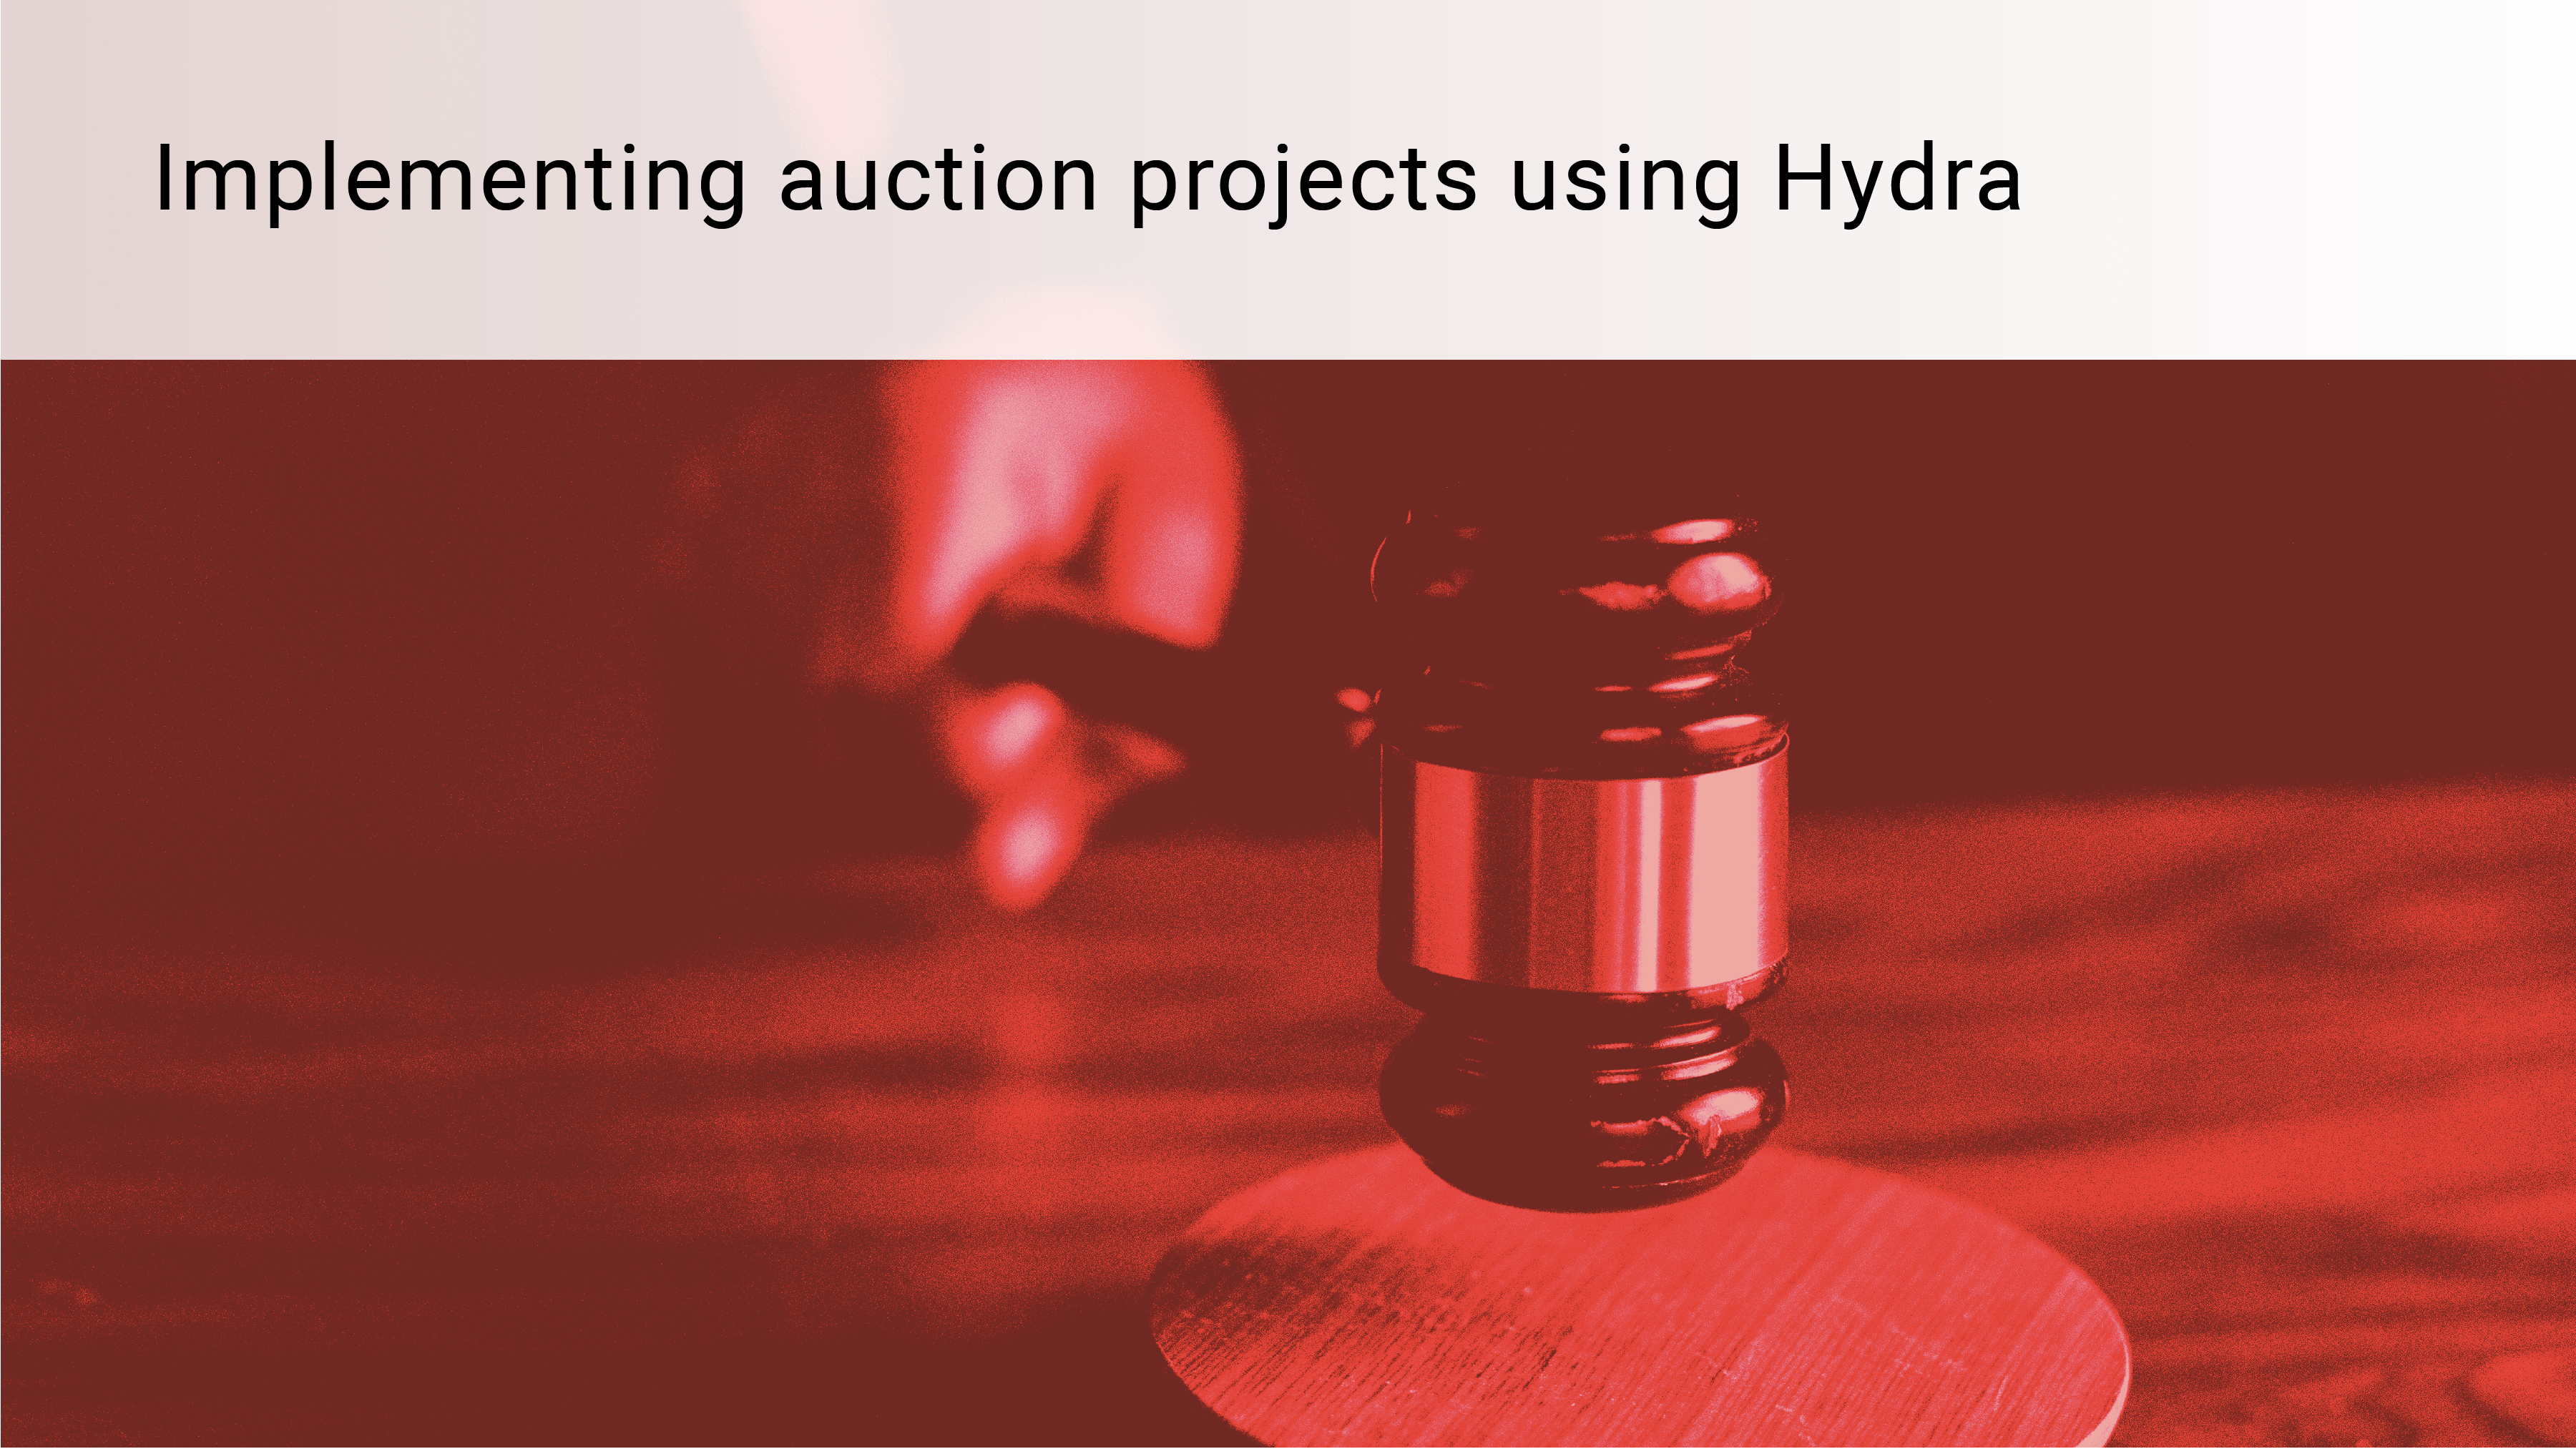 IOG and MLabs cooperate to develop a reference implementation of an auction using Hydra protocols